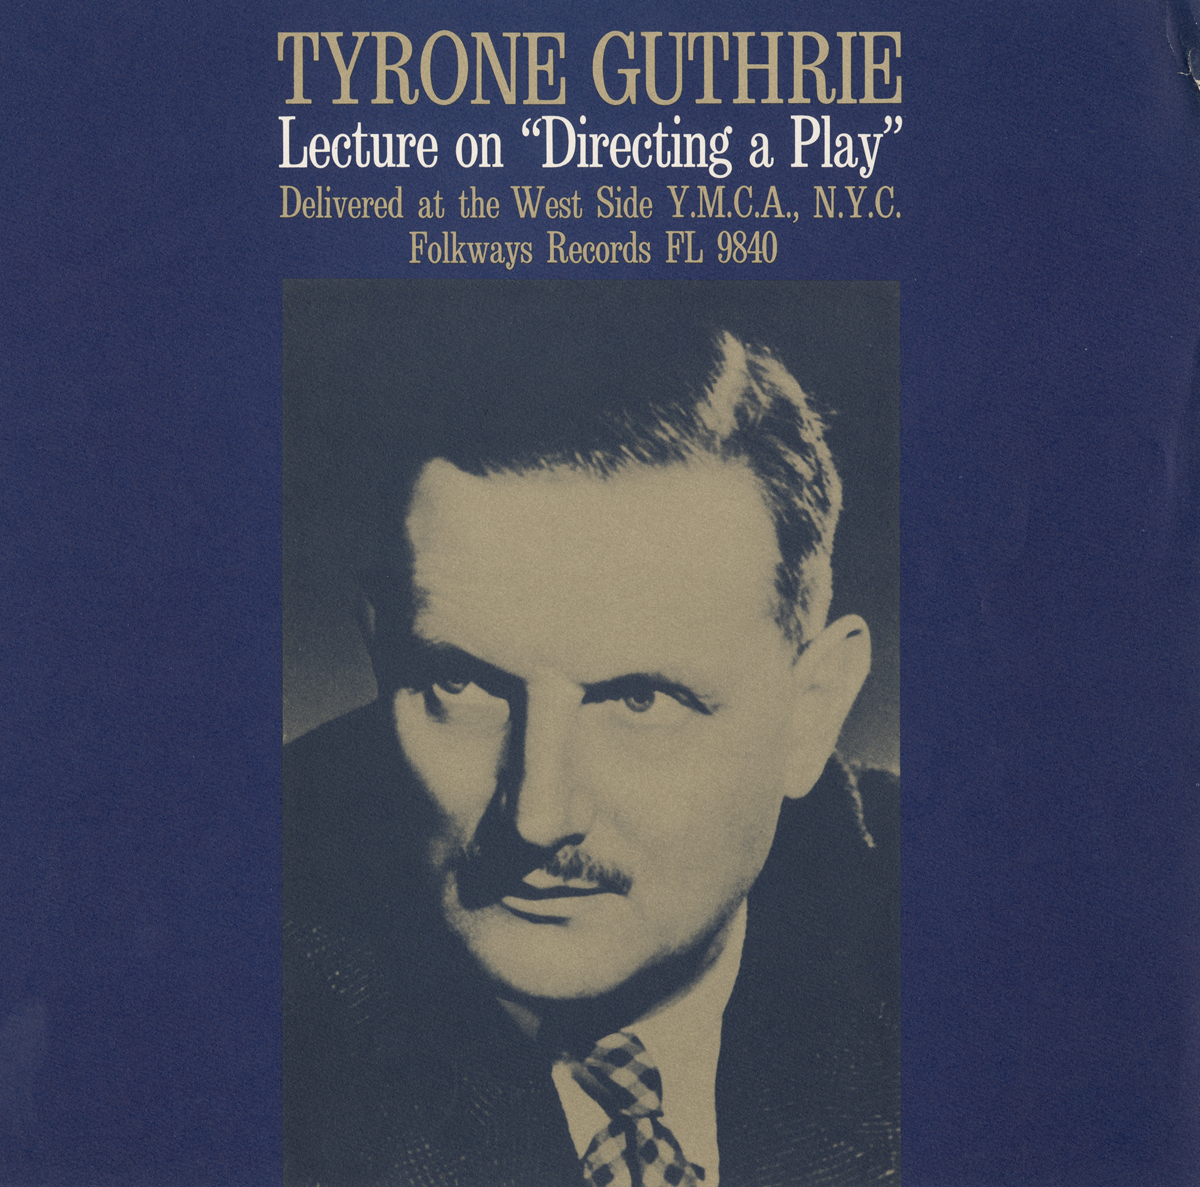 DIRECTING A PLAY: A LECTURE BY TYRONE GUTHRIE